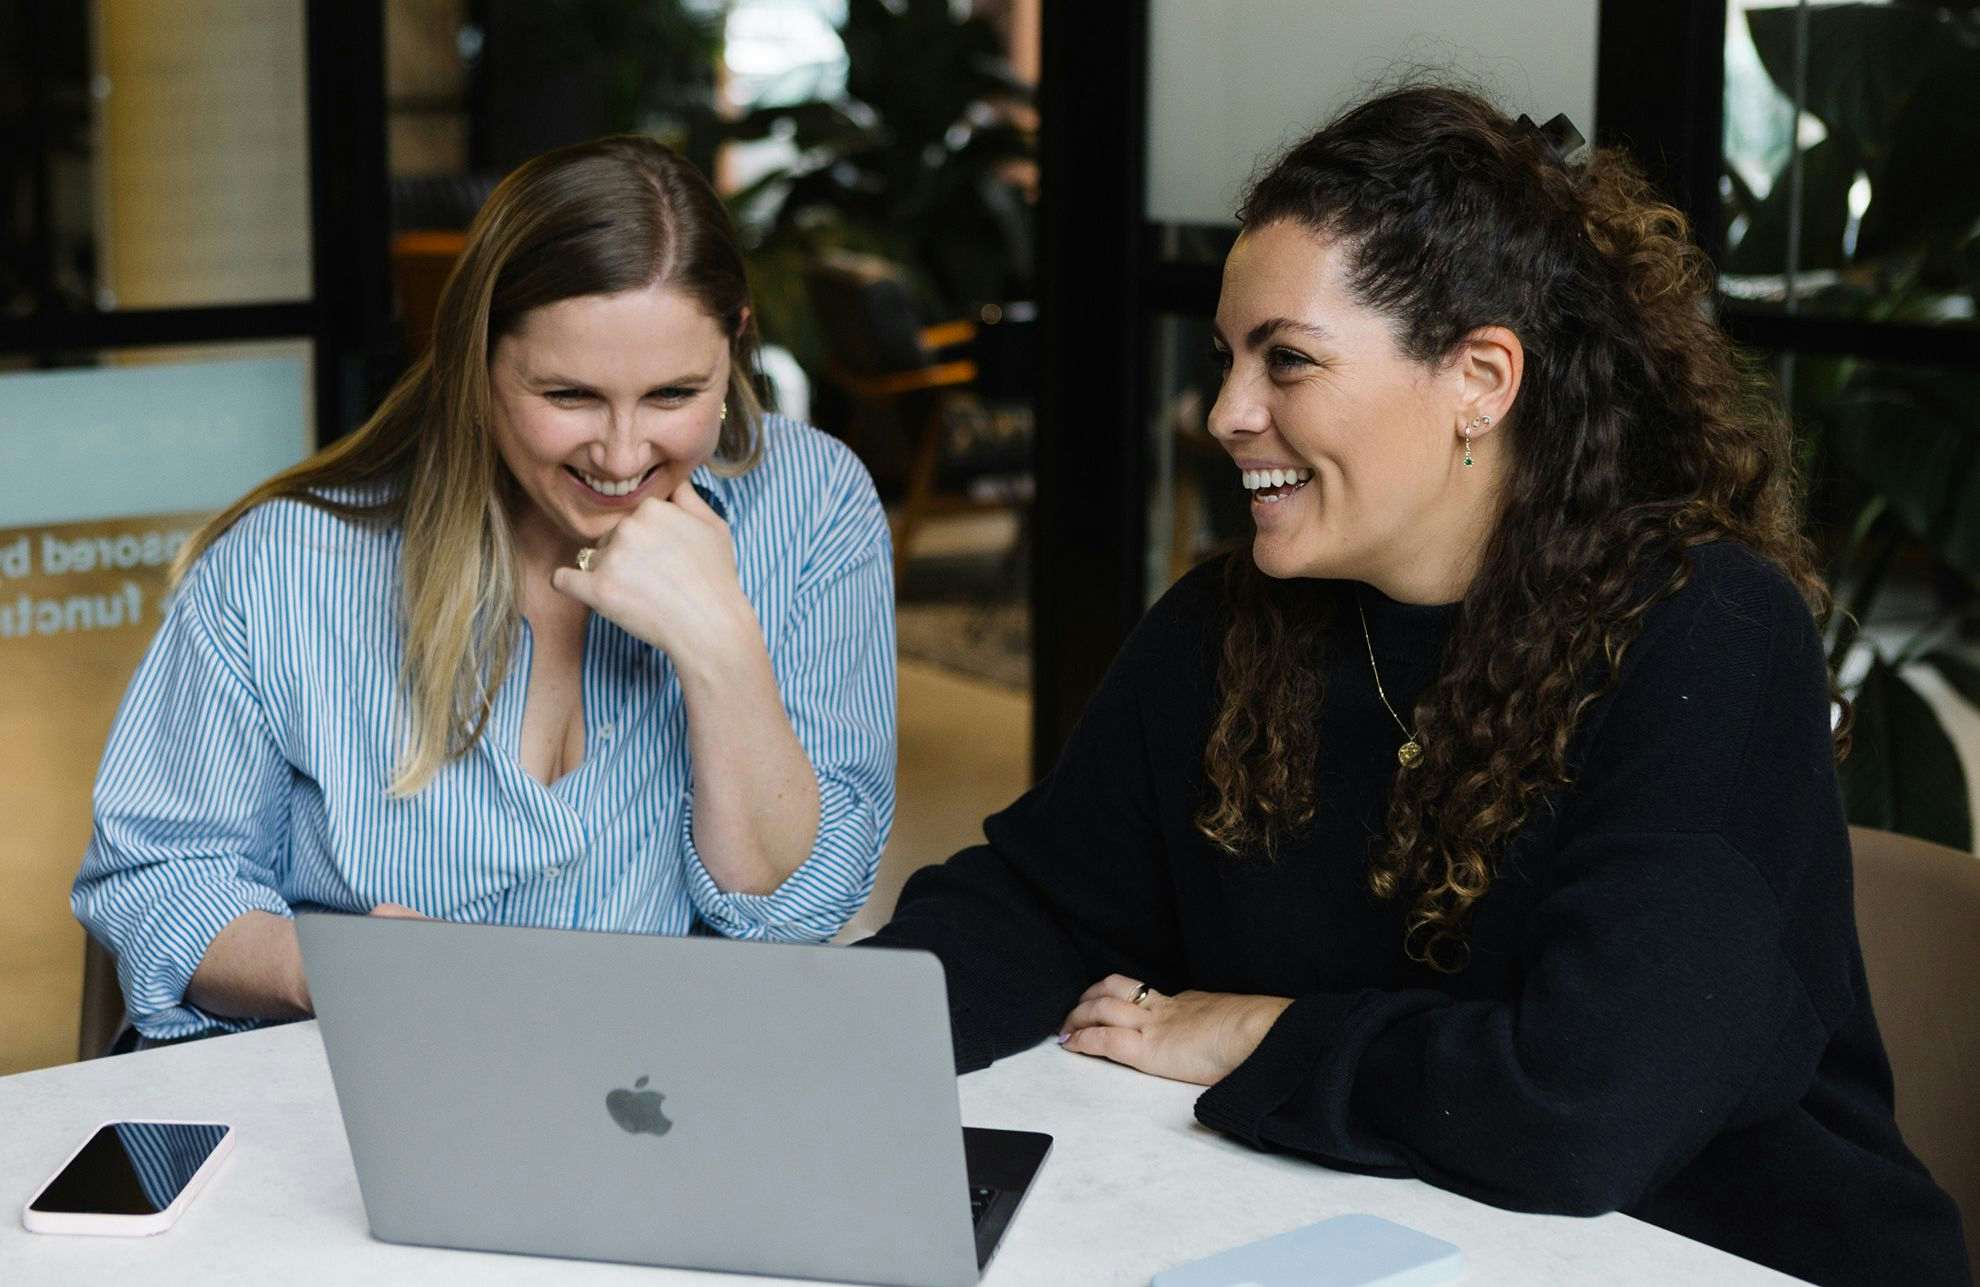 Two women working together and smiling with a laptop on the table.